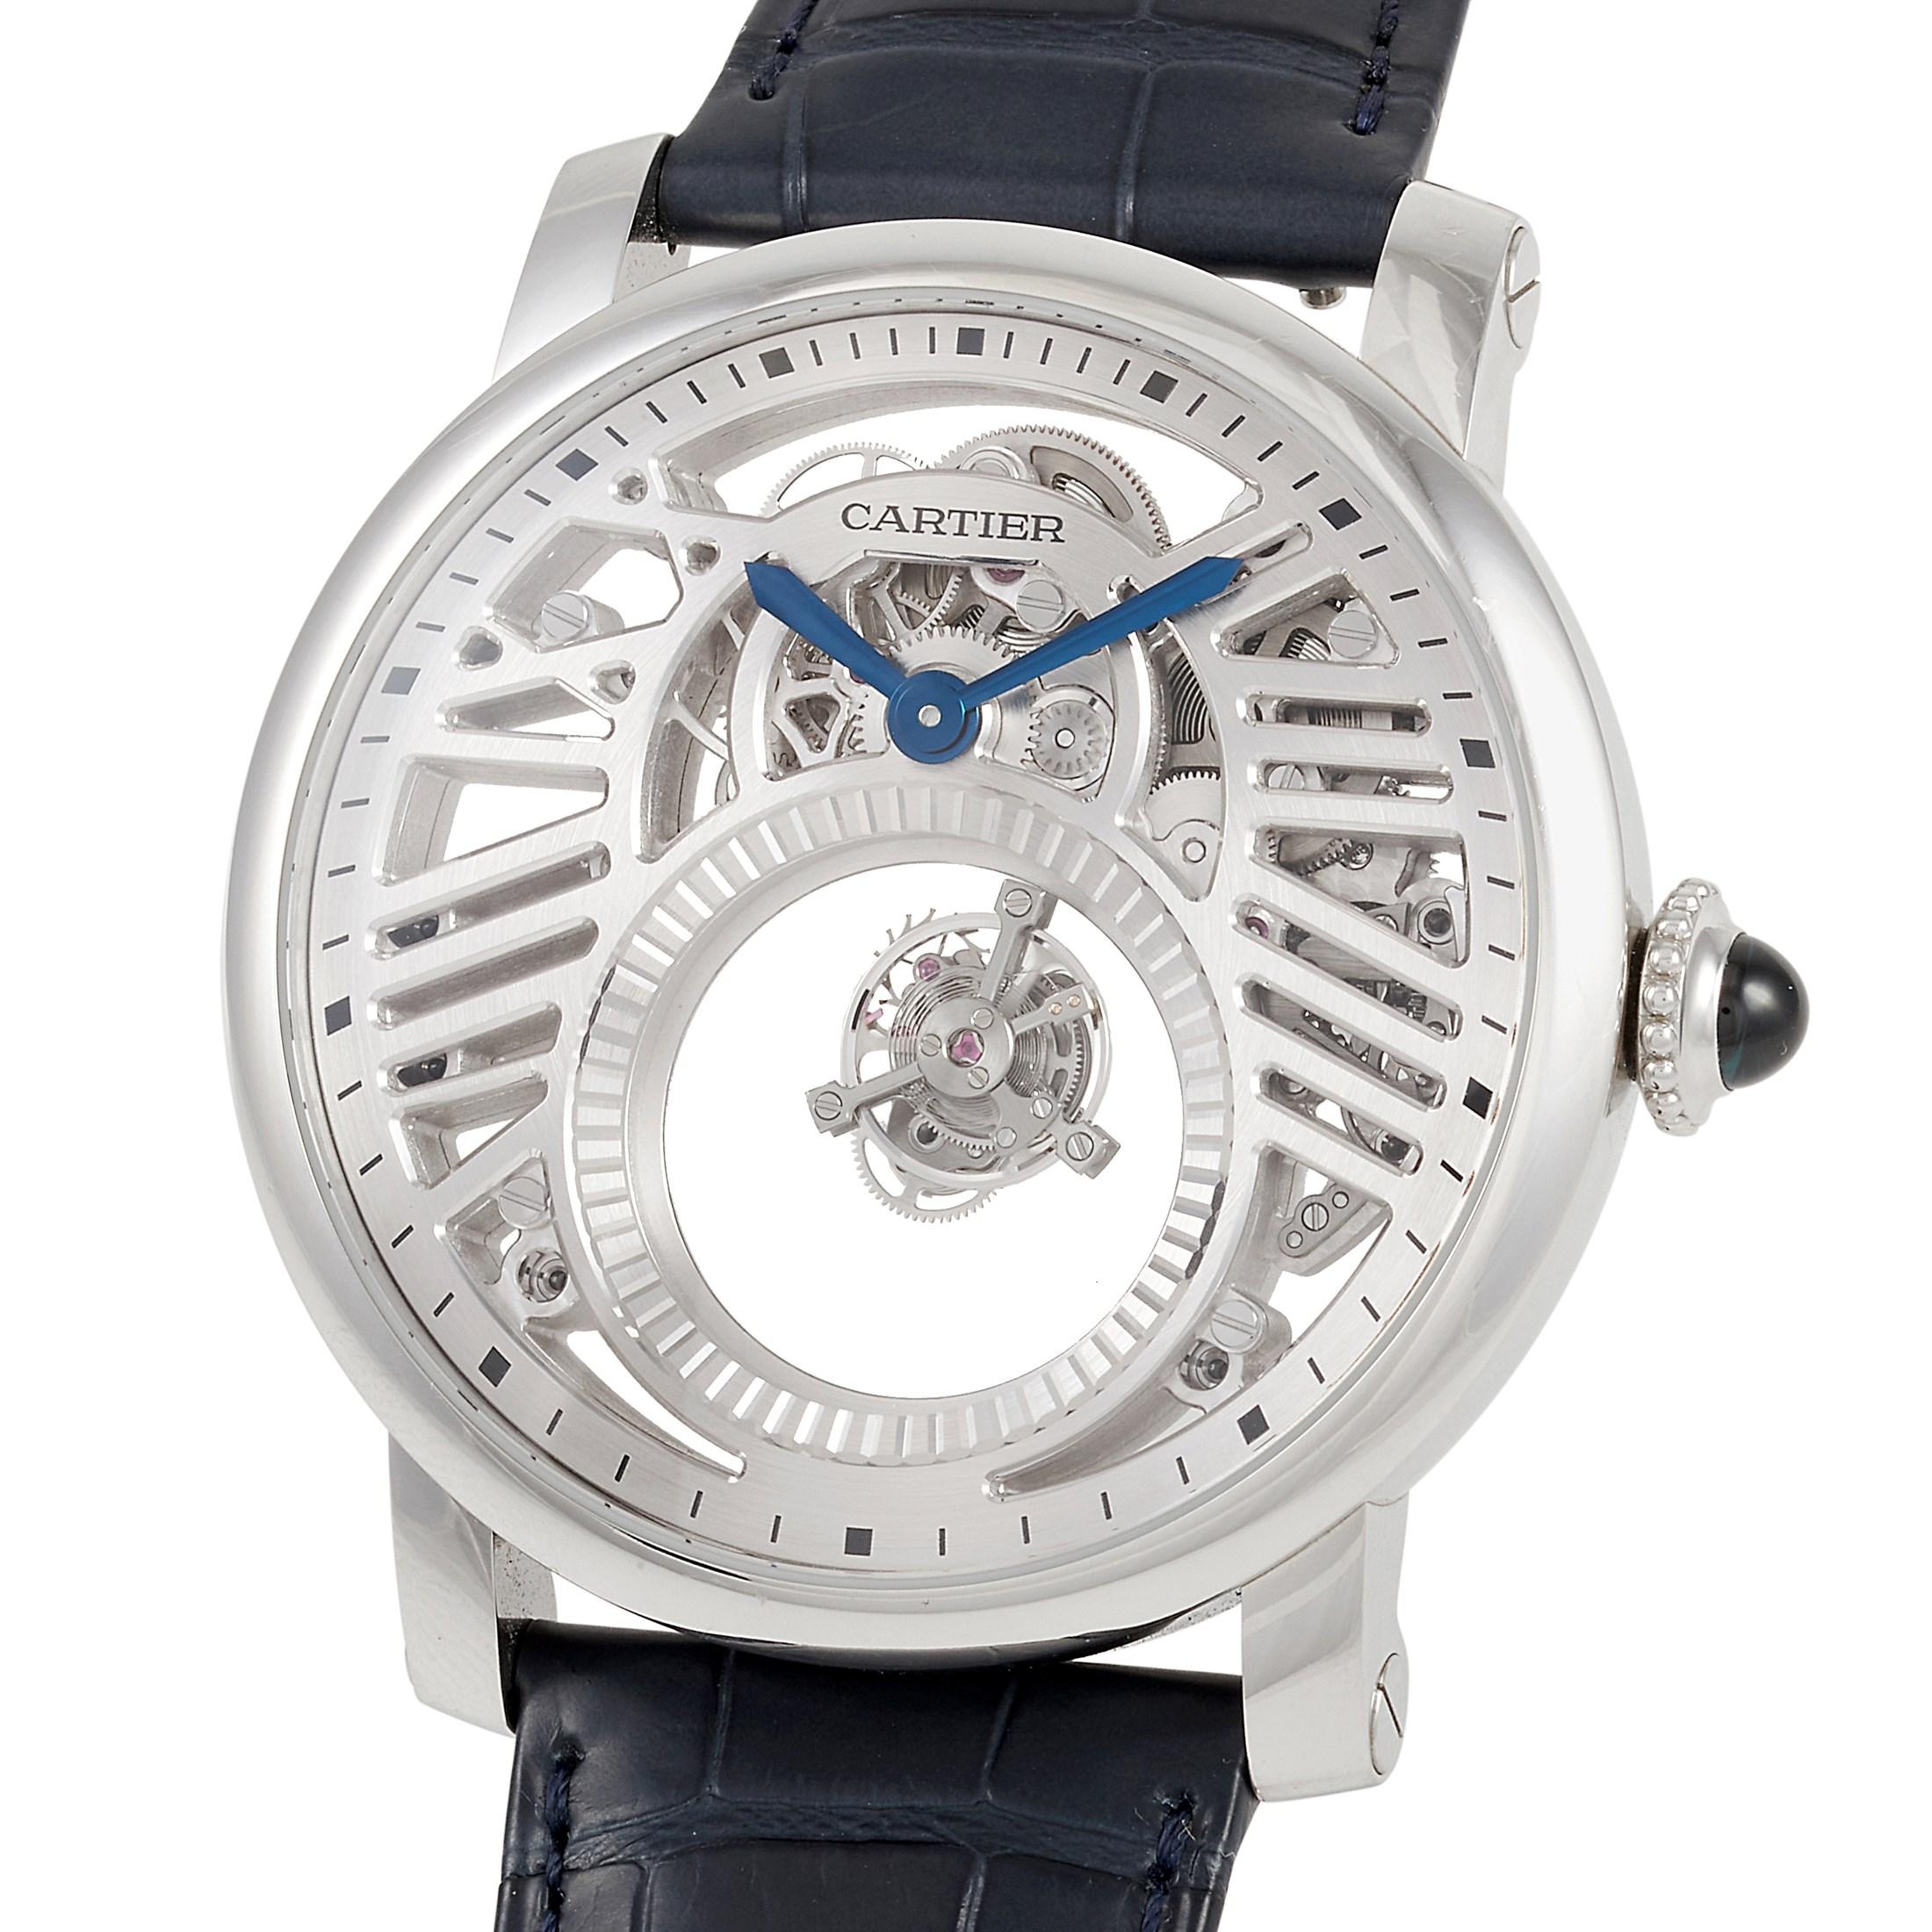 The 19th piece of only 30 pieces, this Rotonde de Cartier Skeleton Mysterious Double Tourbillion Men's Watch WHRO0039 is a limited edition watch that will take your collection to the next level. Powered by Caliber 9465 MC with 286 components and a